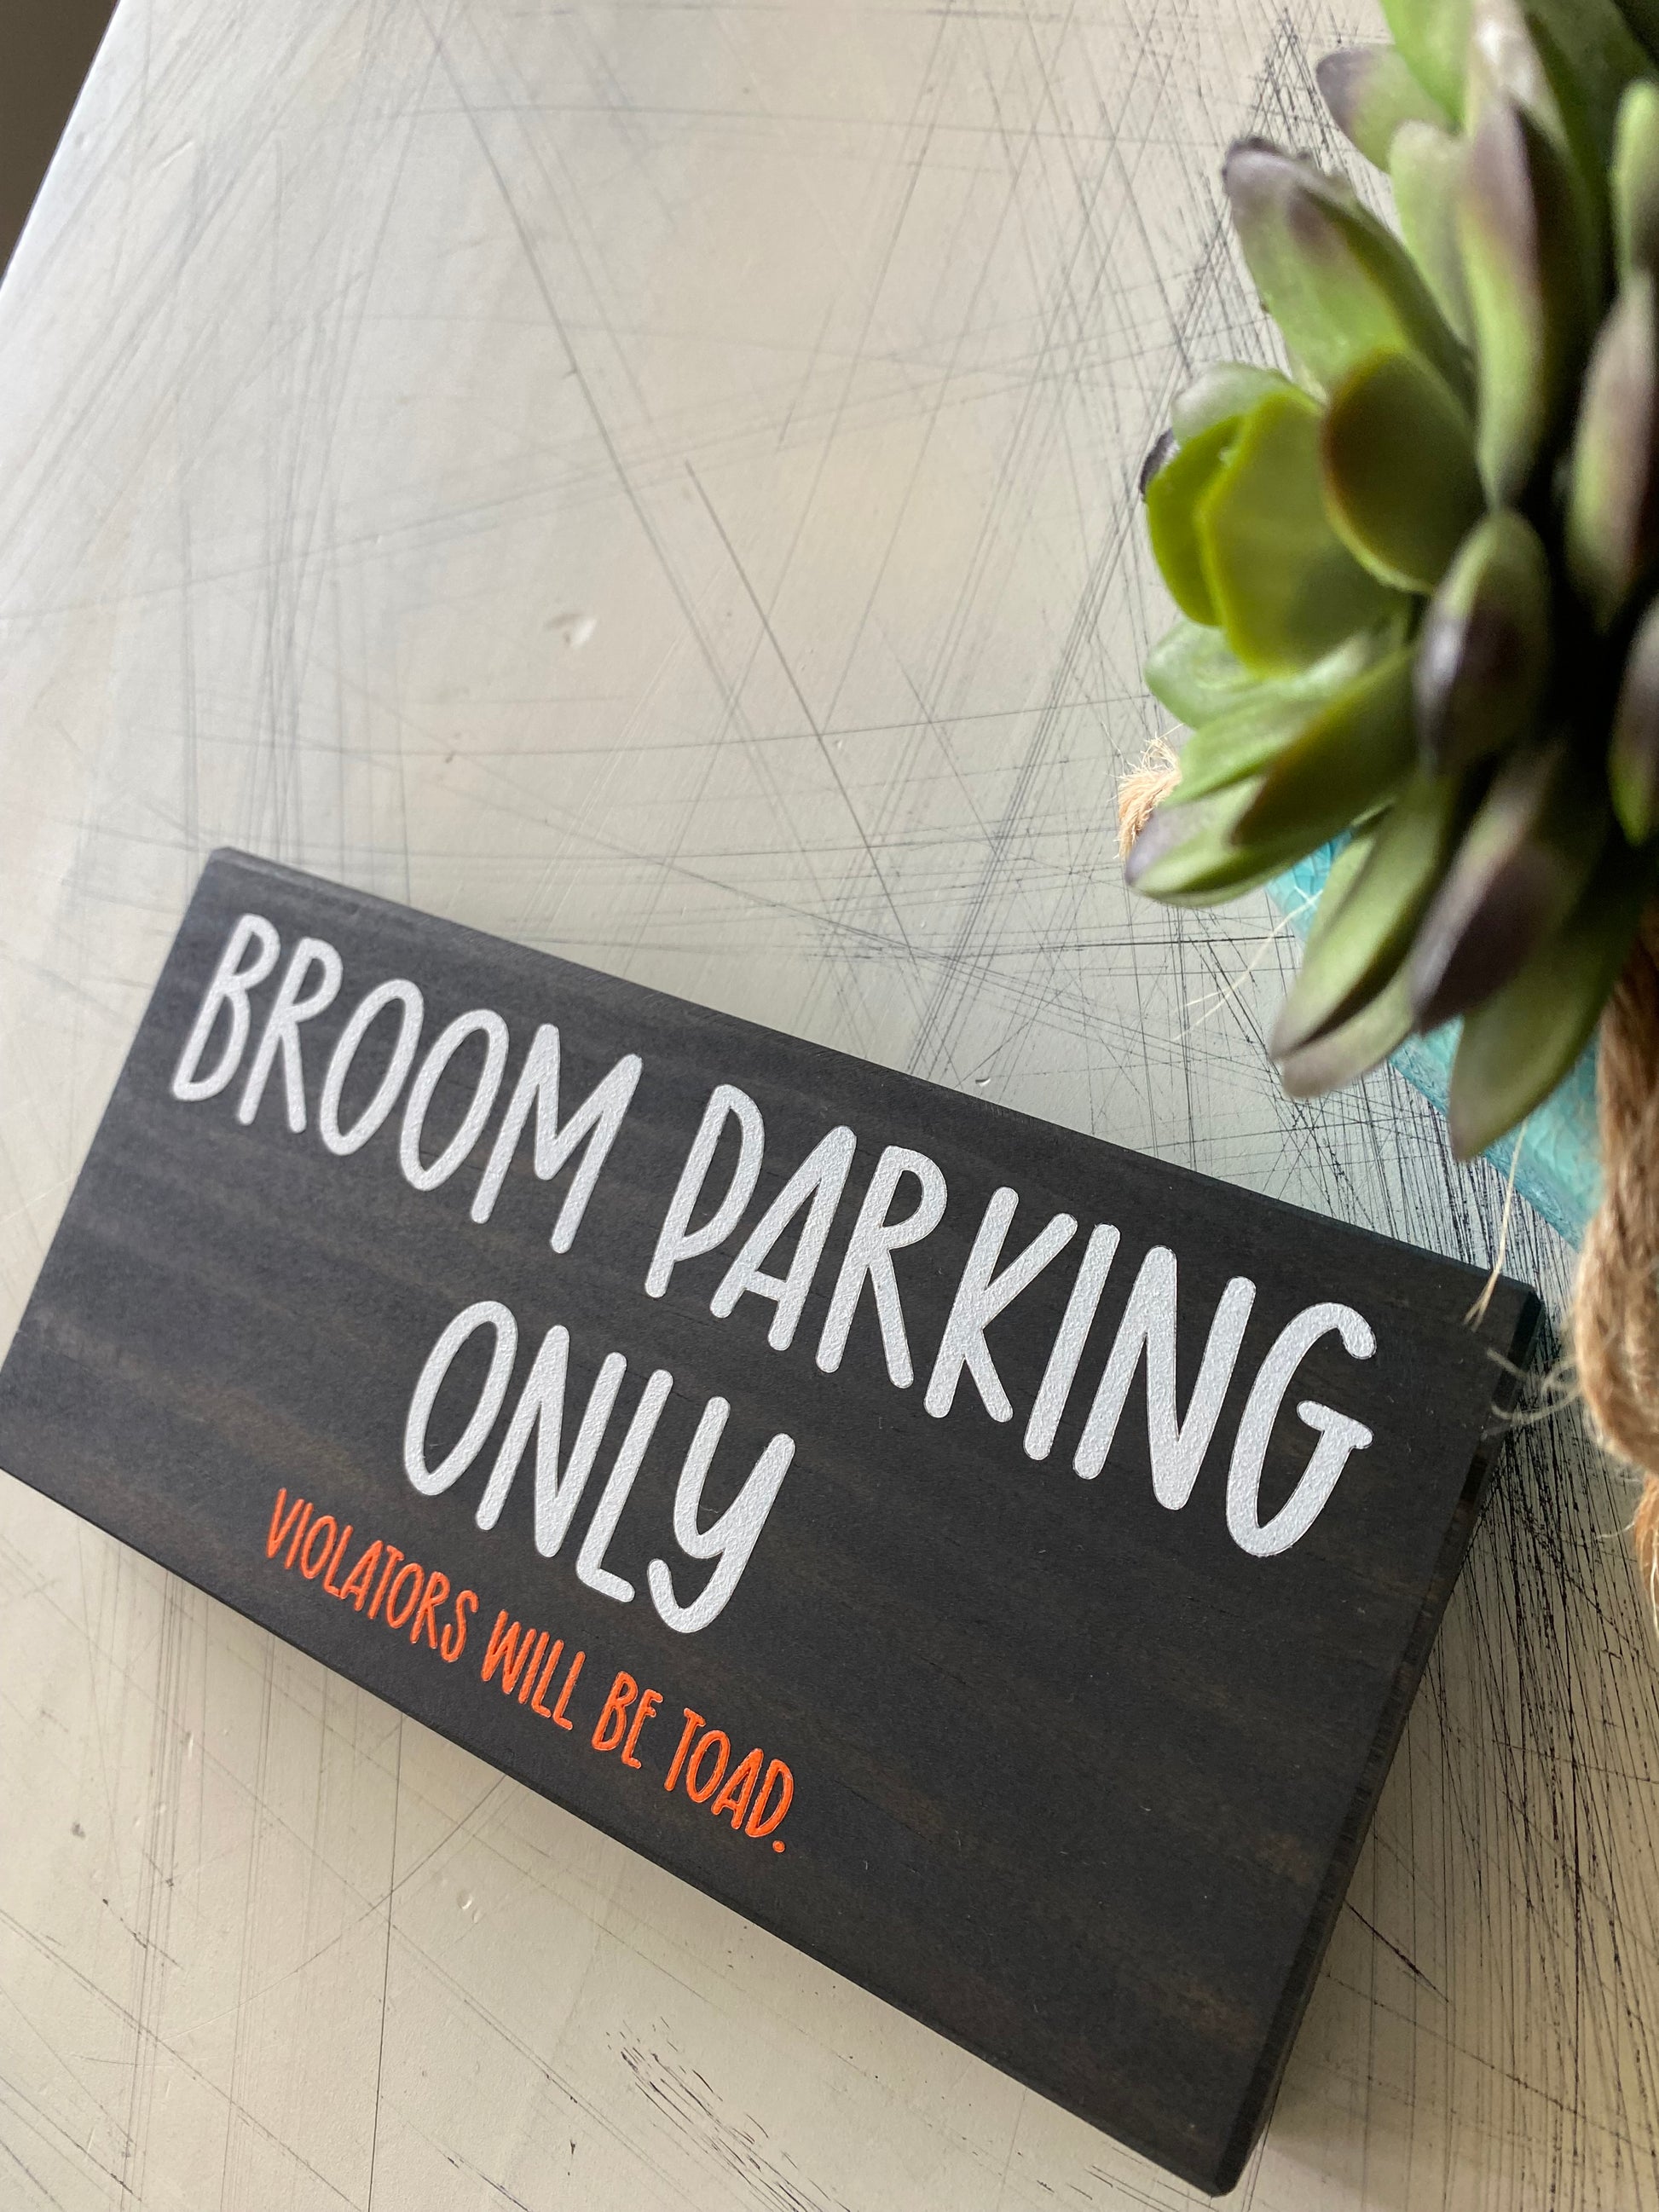 Broom Parking Only - Violators will be Toad. - Handmade mini wood sign